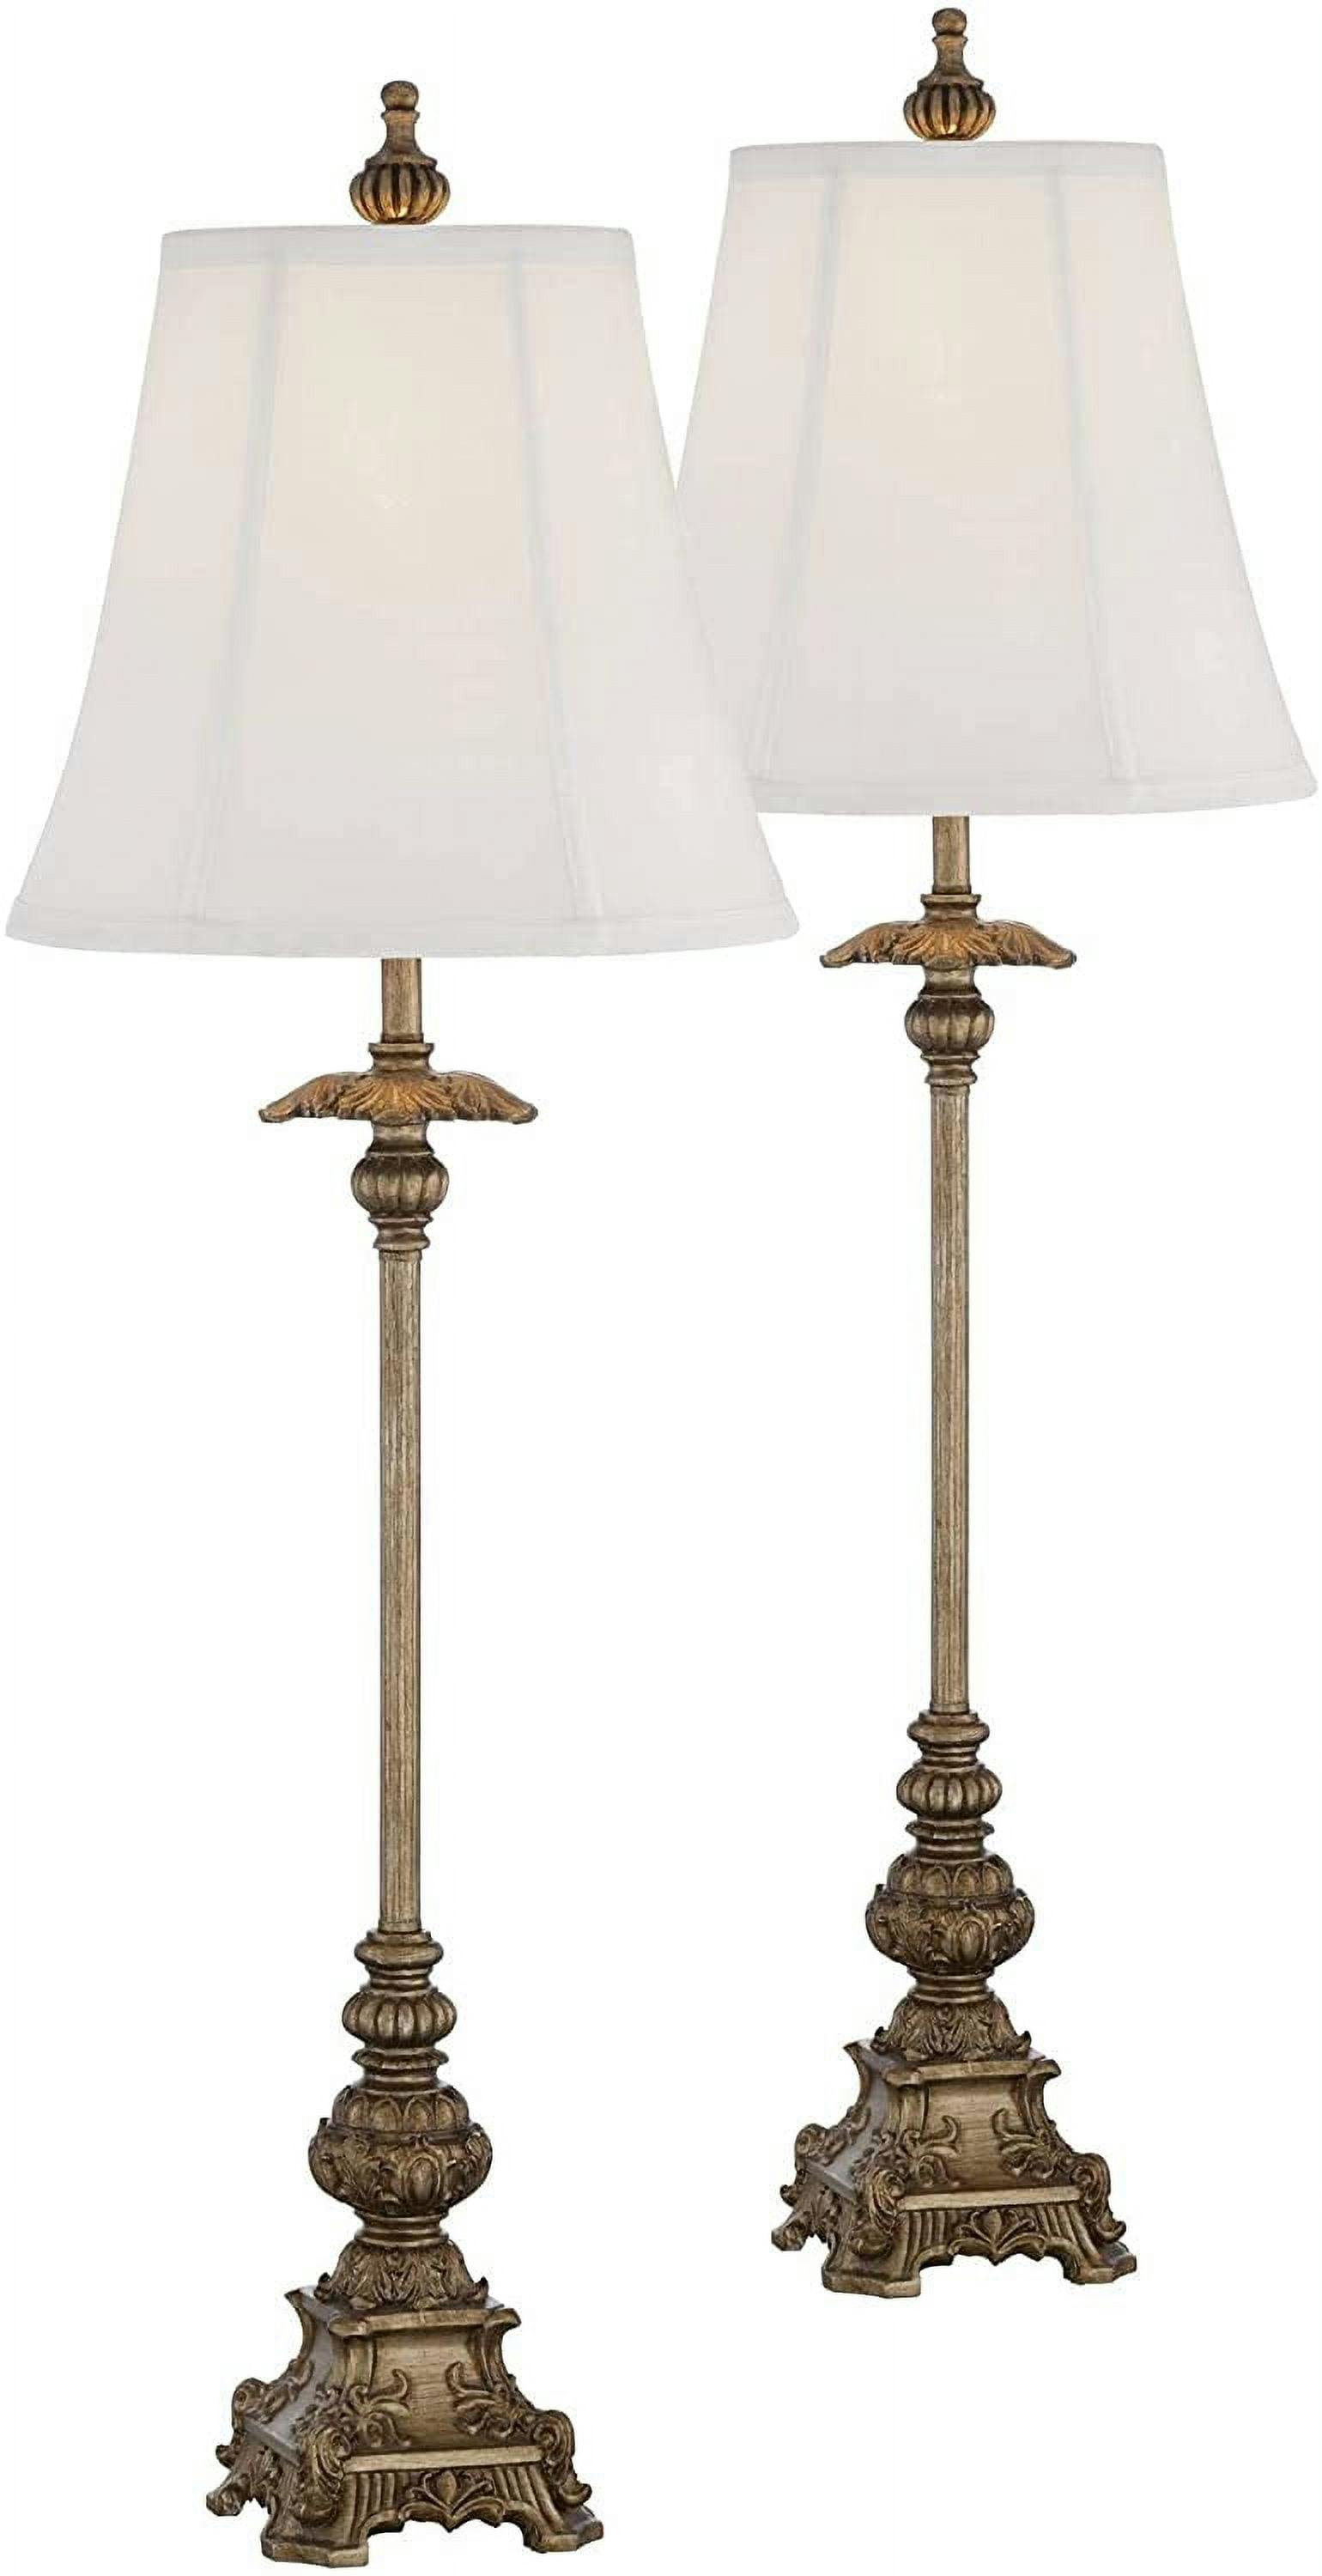 Juliette Antique Gold Ornate Buffet Table Lamp Set with White Bell Shades